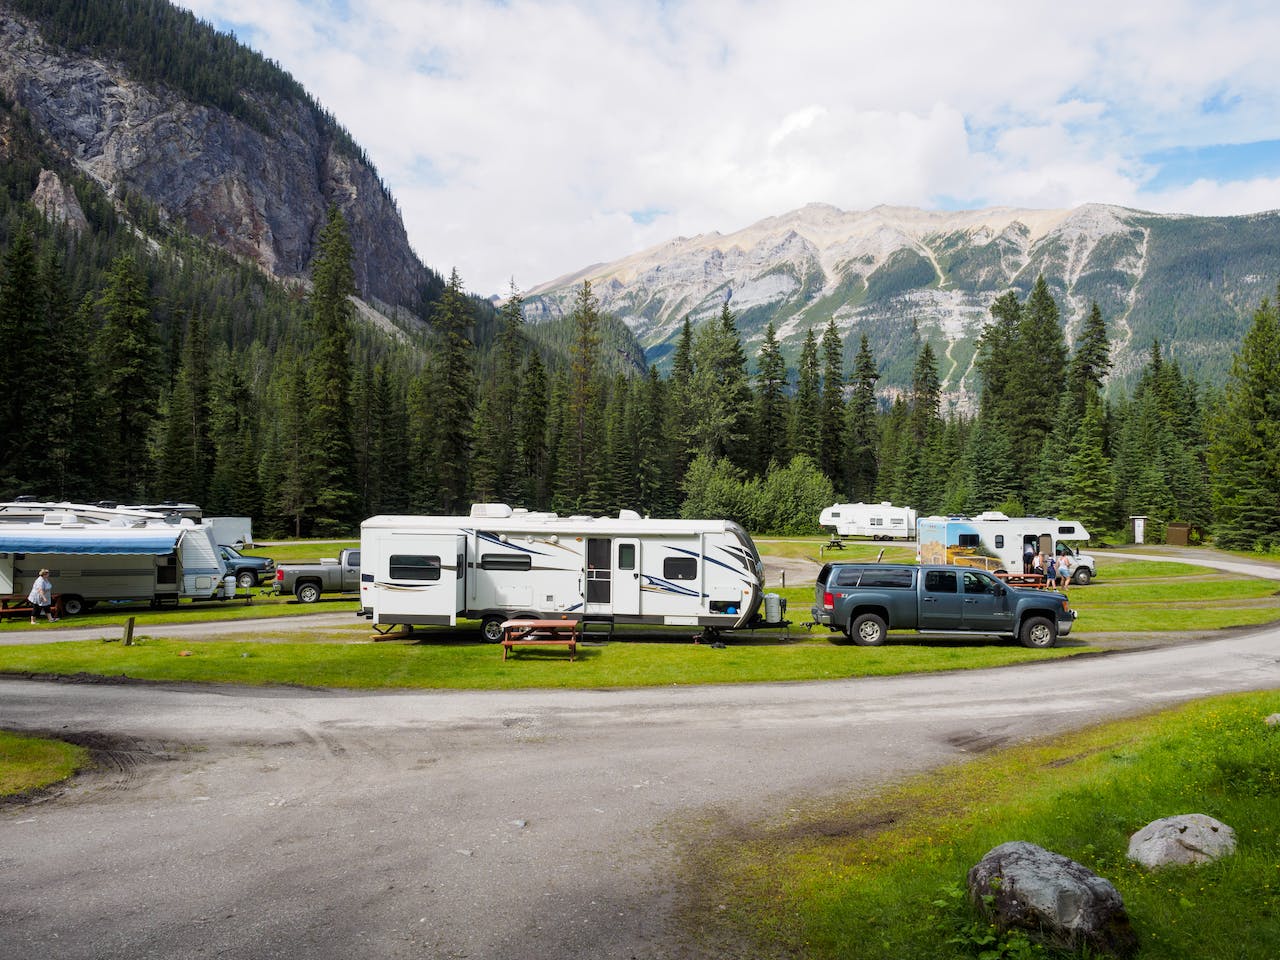 Cars with Trailers at a Campsite in Mountains